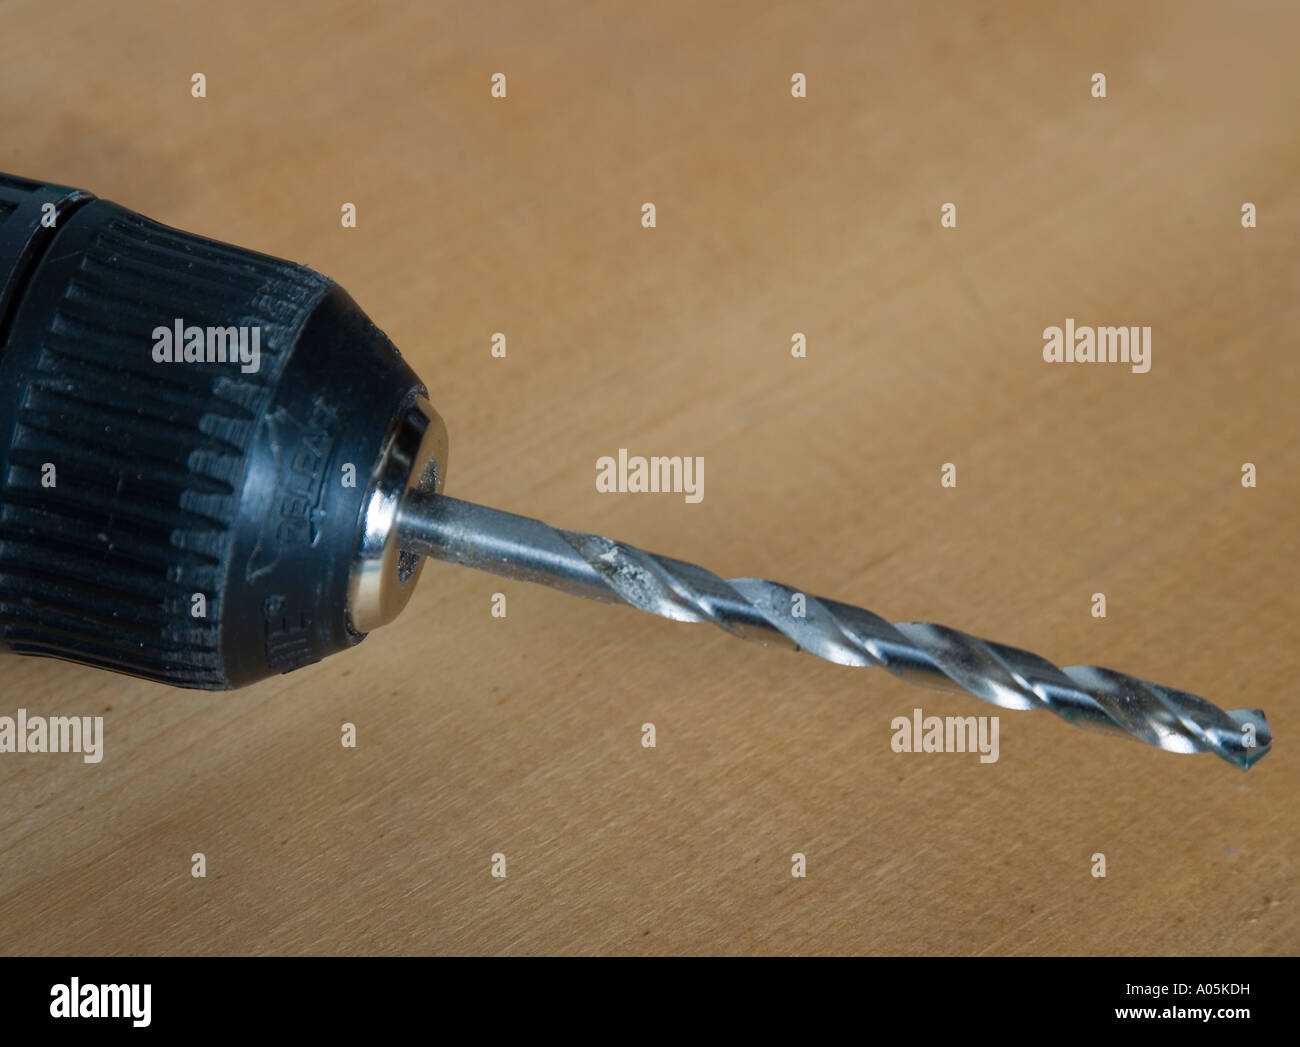 Drill bit on a power tool Stock Photo